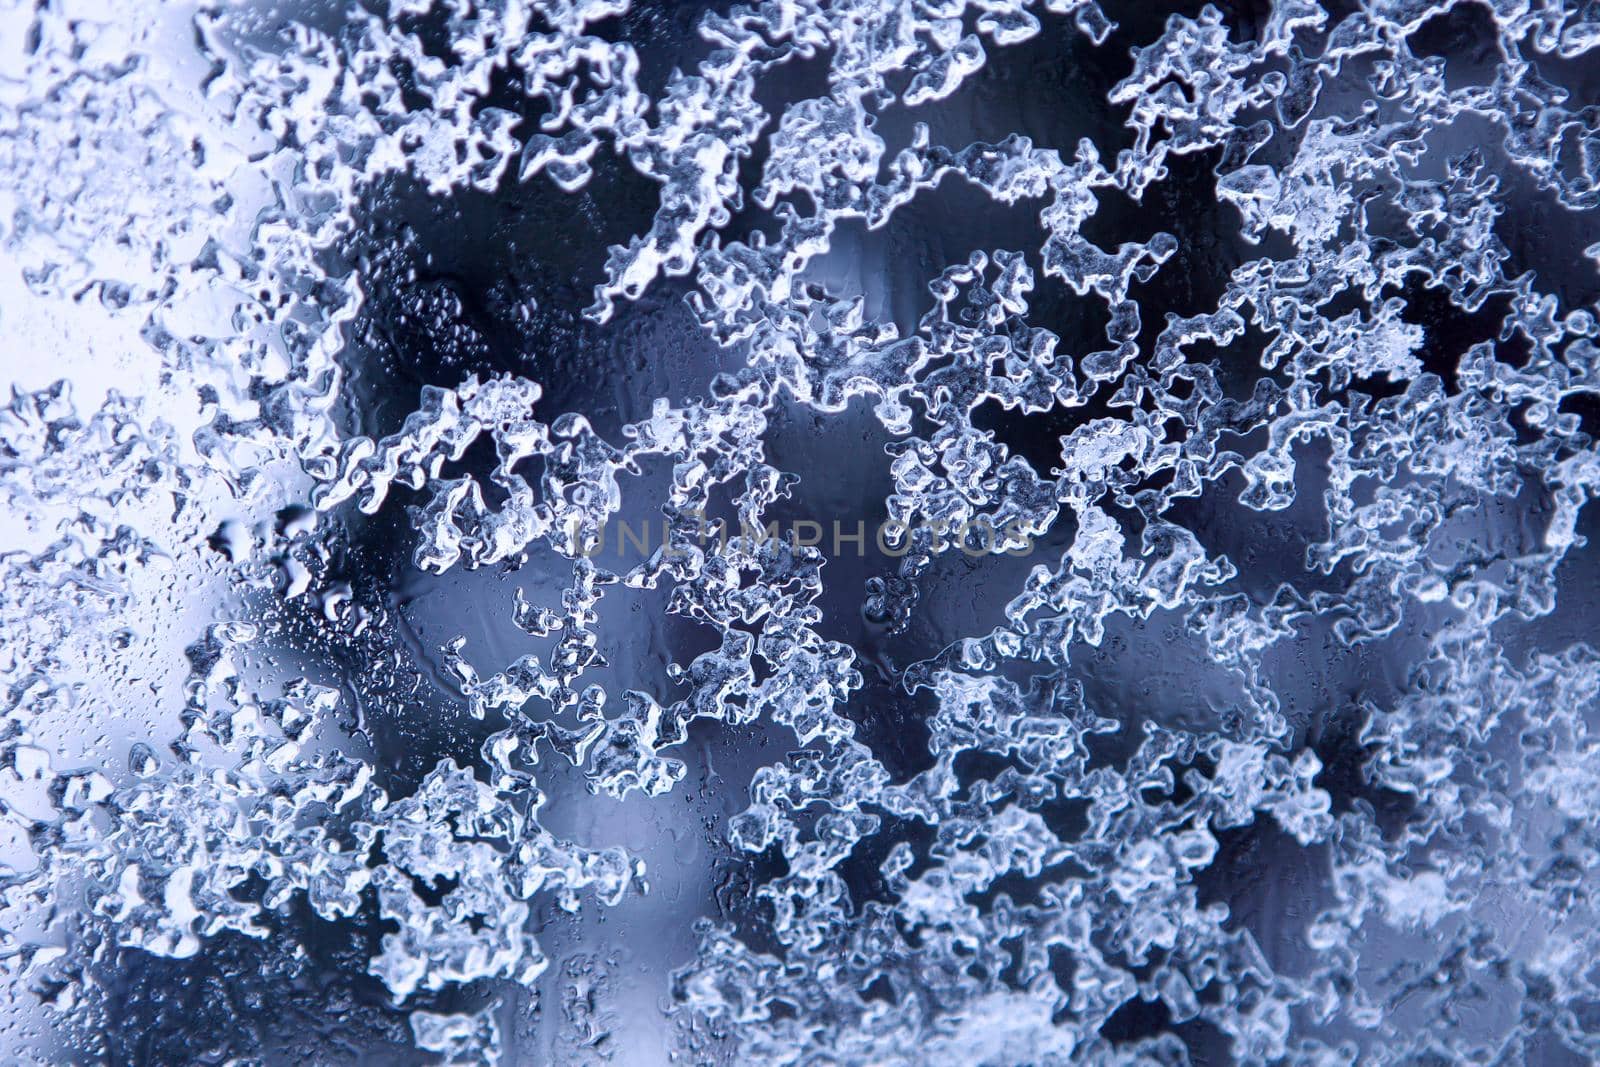 Frozen decorative water drops - natural winter ice pattern on glass. melting snowflakes by julija